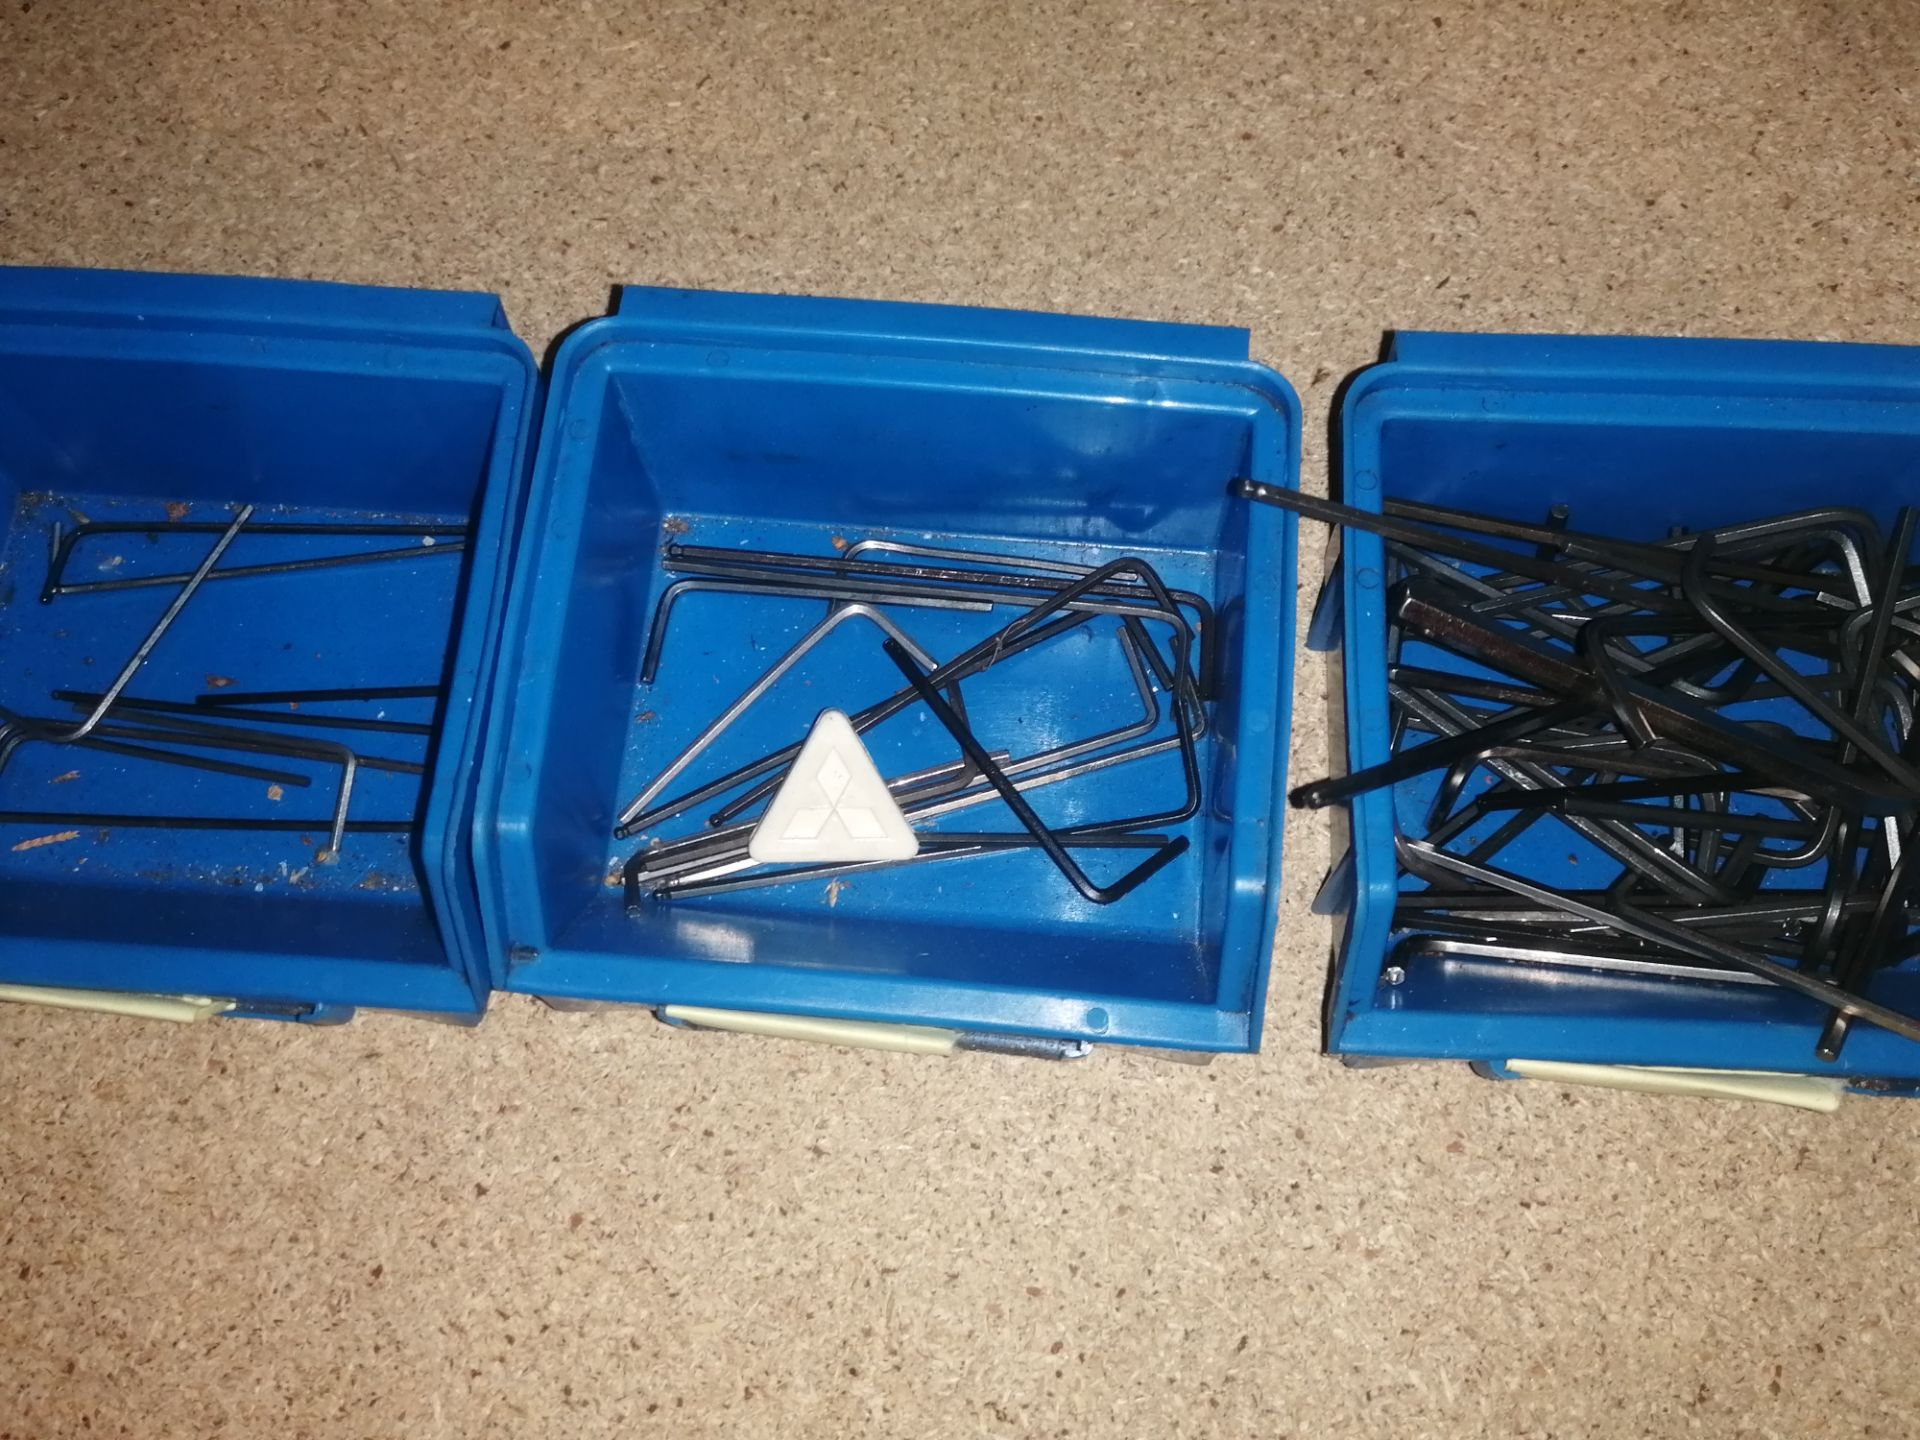 Various Allen Keys & Torque Keys (Please Note: Plastic Container Boxes Are Not Included) - Image 11 of 11